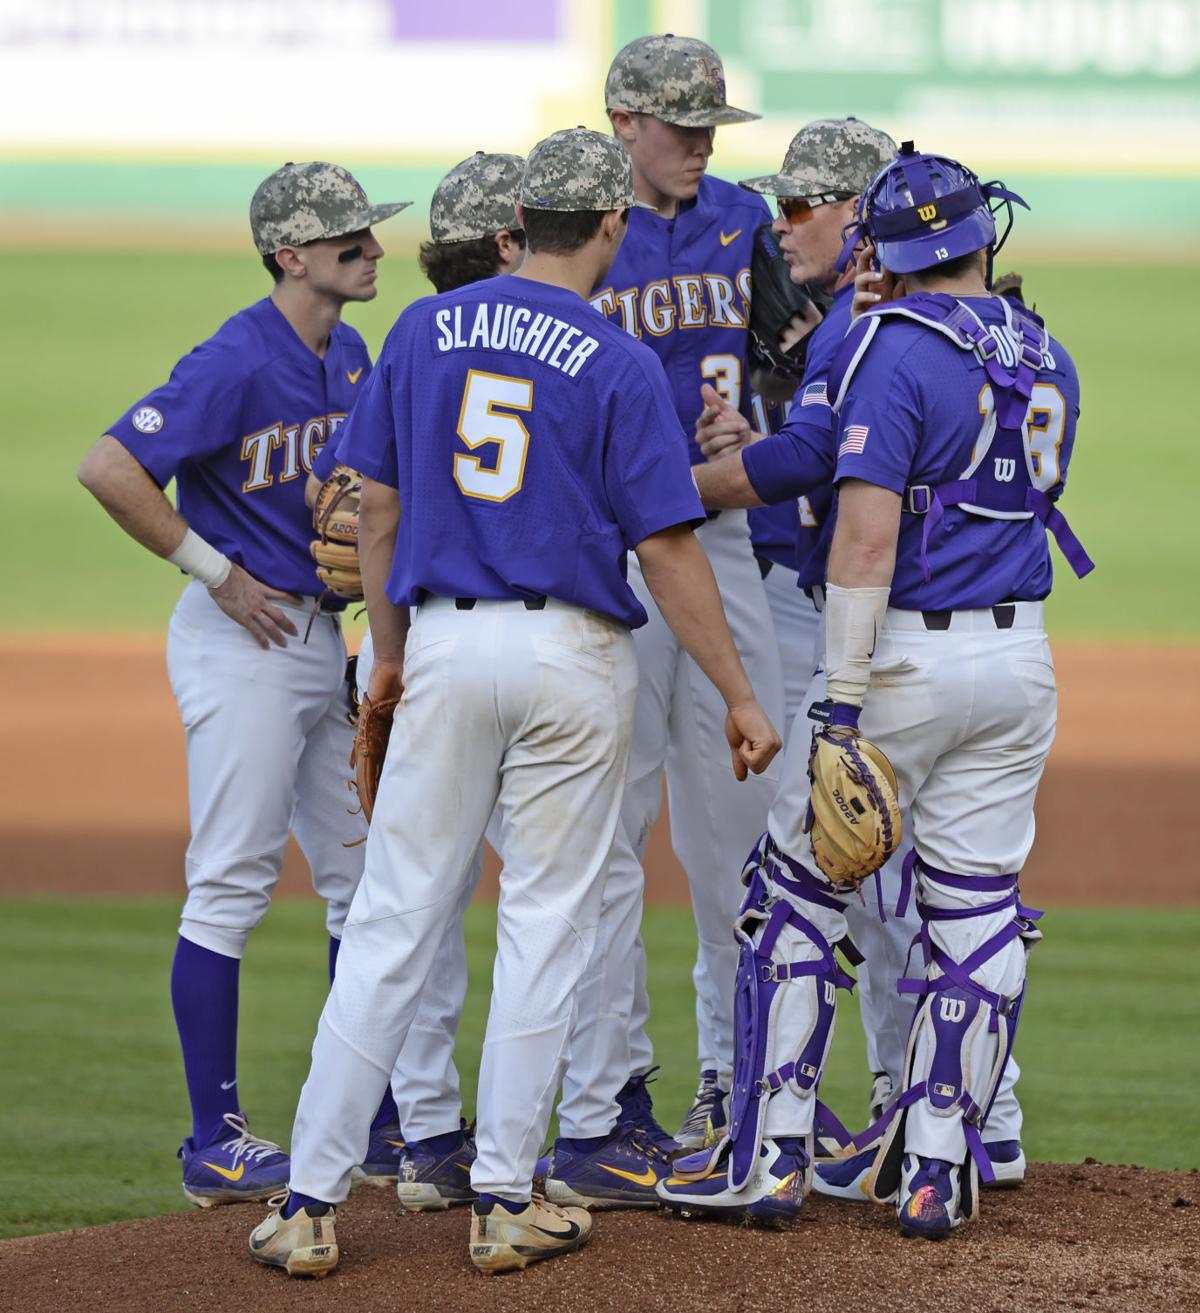 LSU baseball in the rankings Tigers take a fall after dropping series